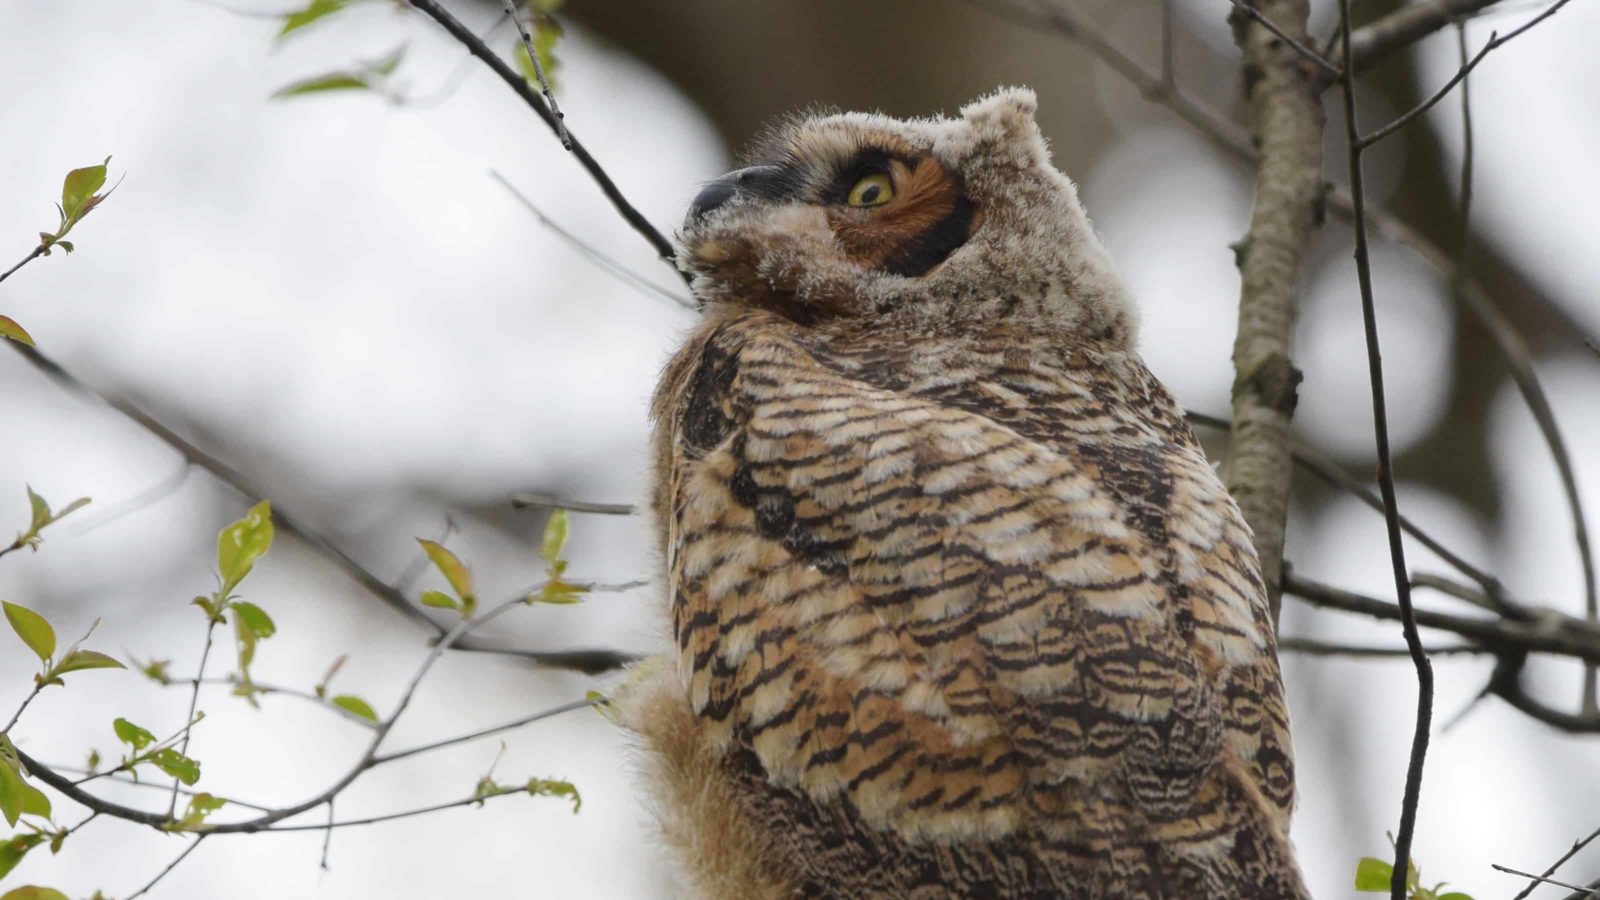 A young Great Horned Owl looks around from a branch.